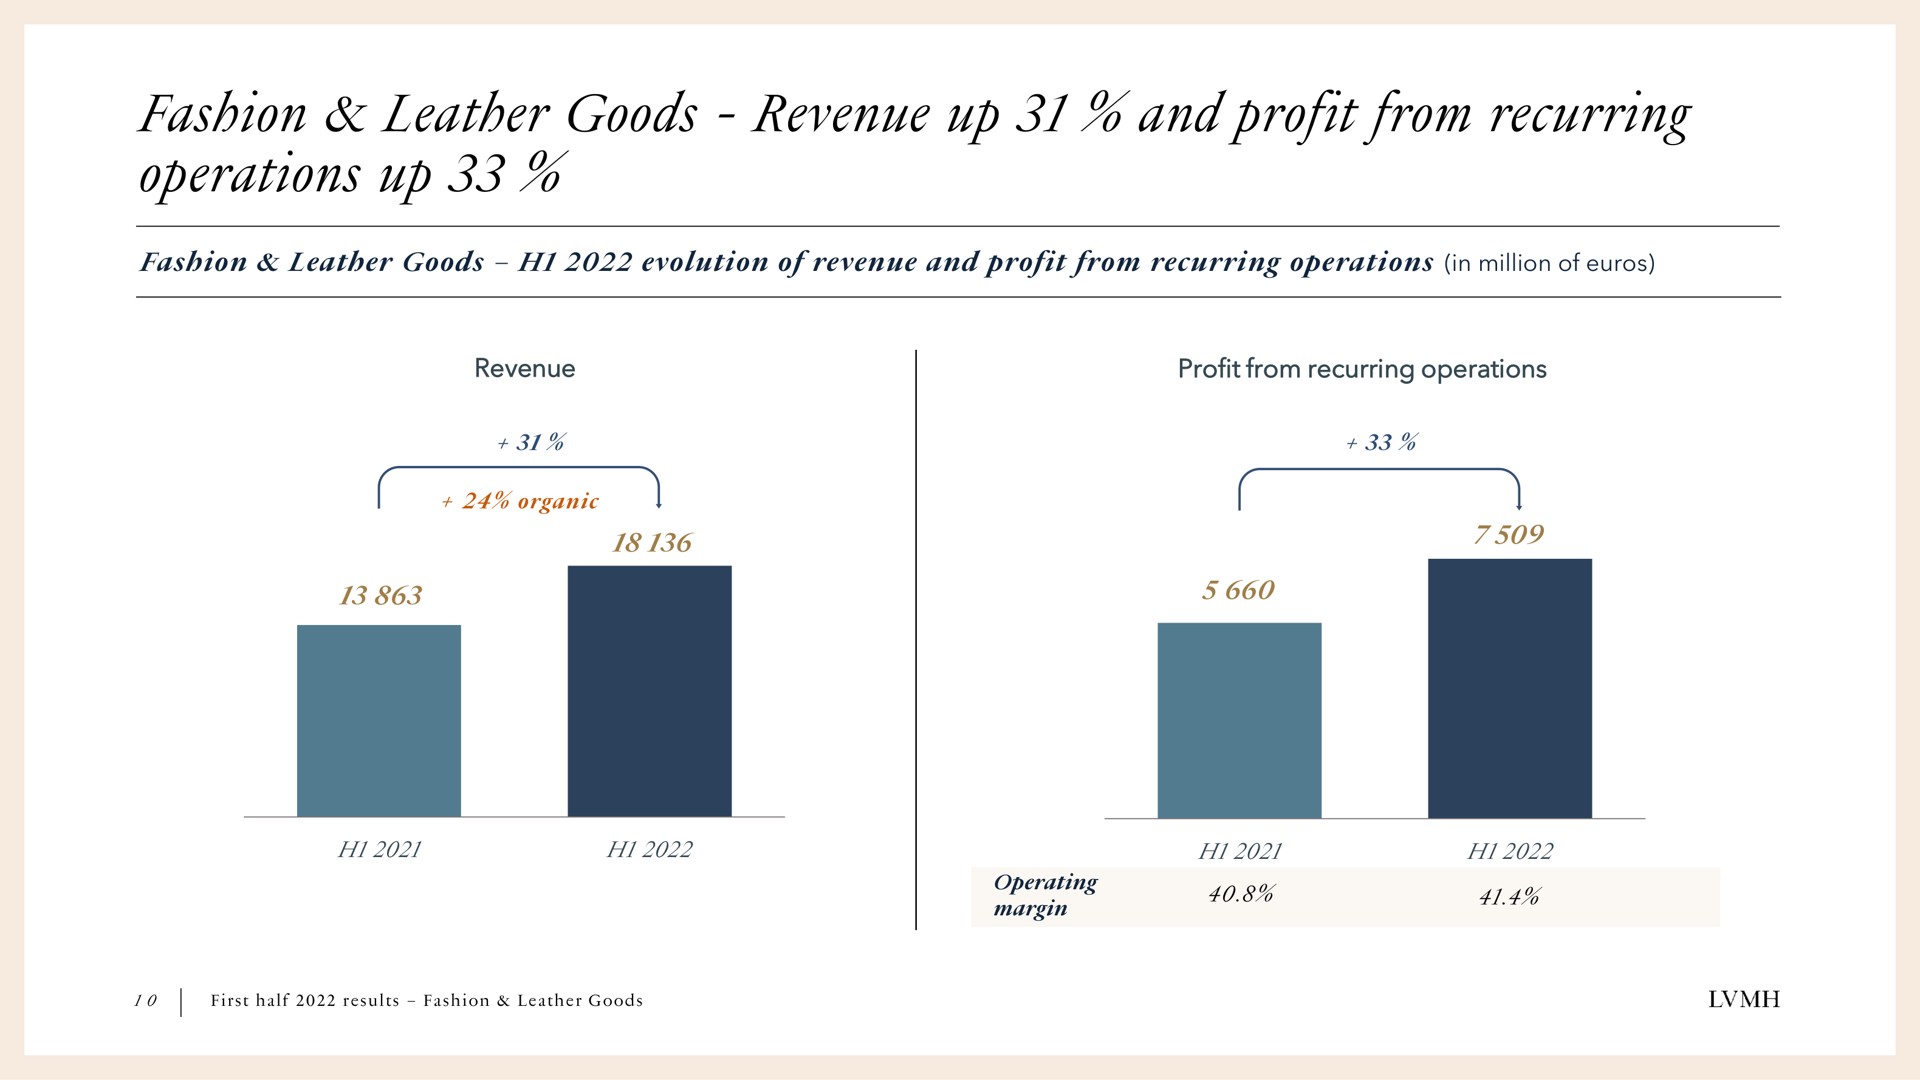 fashion leather goods revenue up and profit from recurring operations up | LVMH